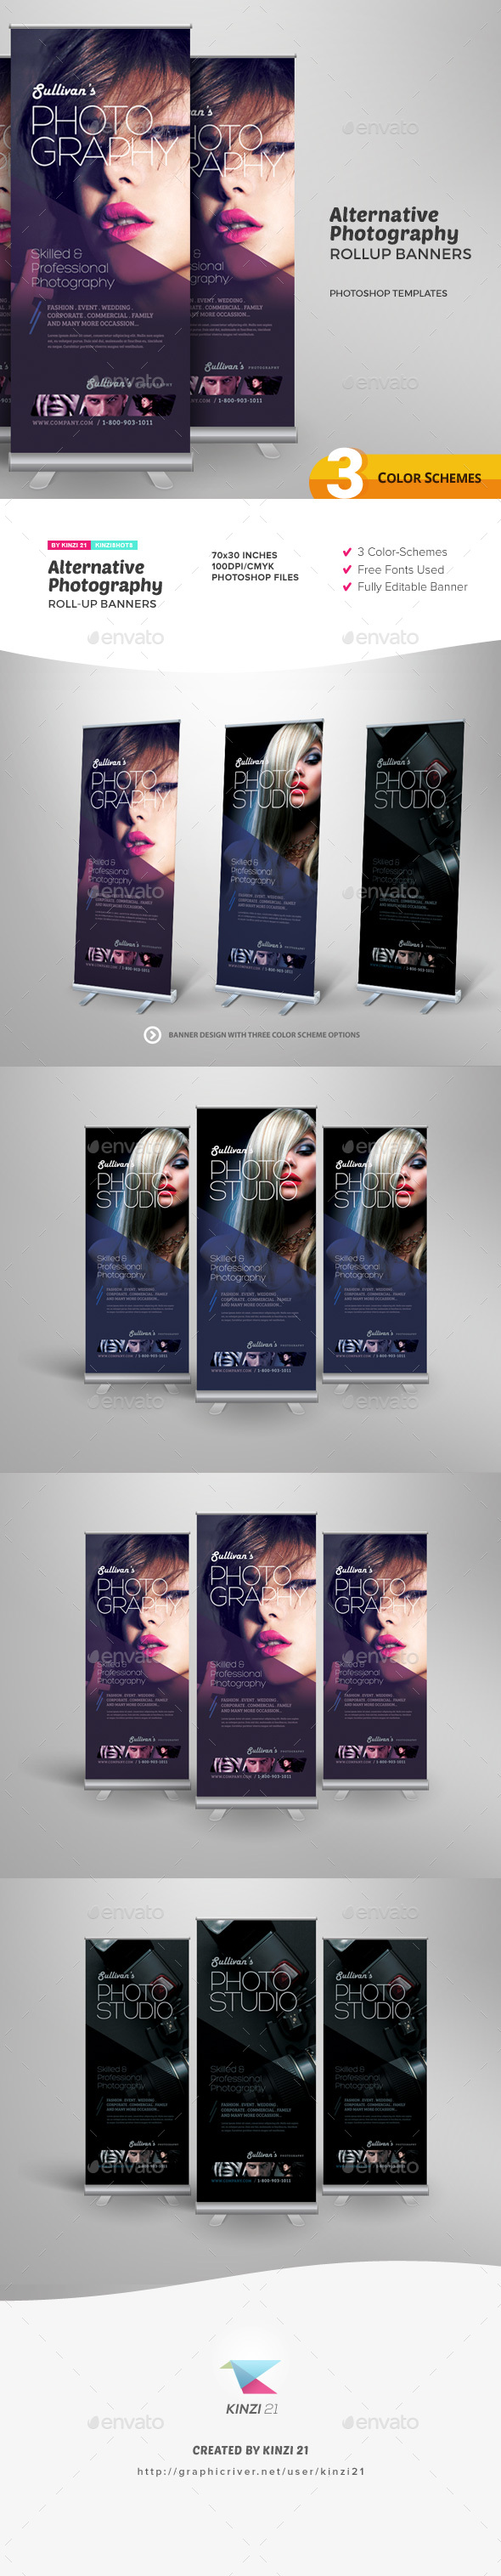 Alternative Photography Roll-up Banners